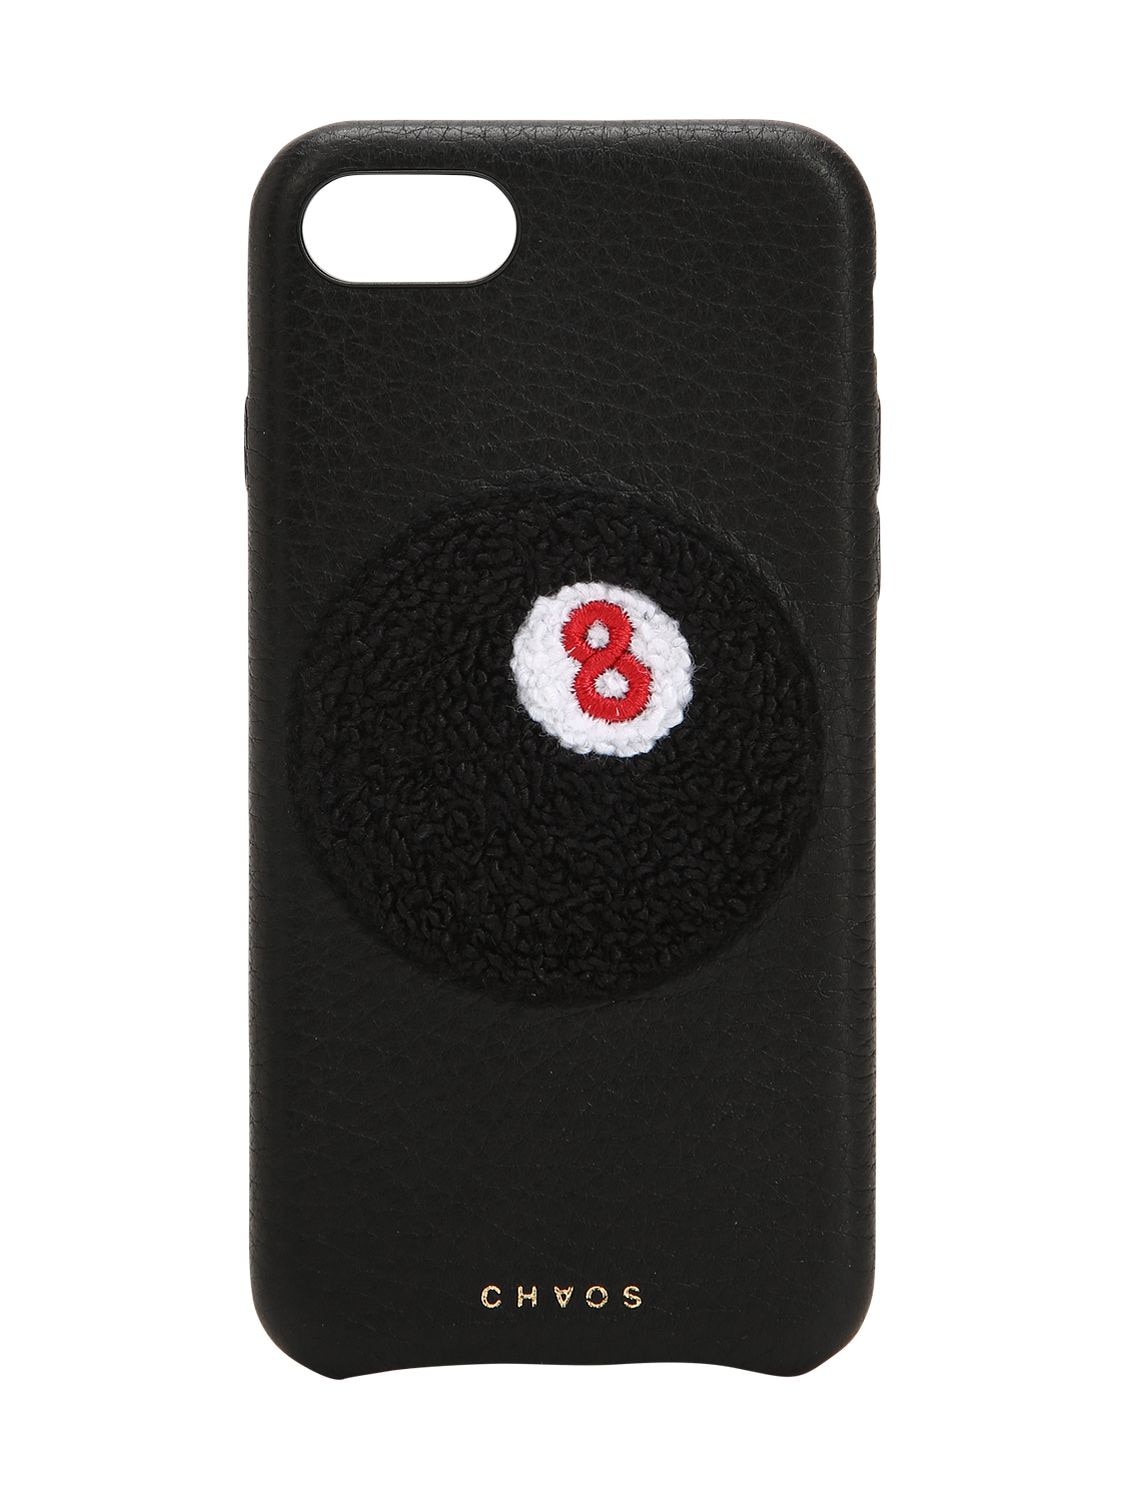 Chaos 8-ball Leather Iphone 7/8 Plus Cover In Black